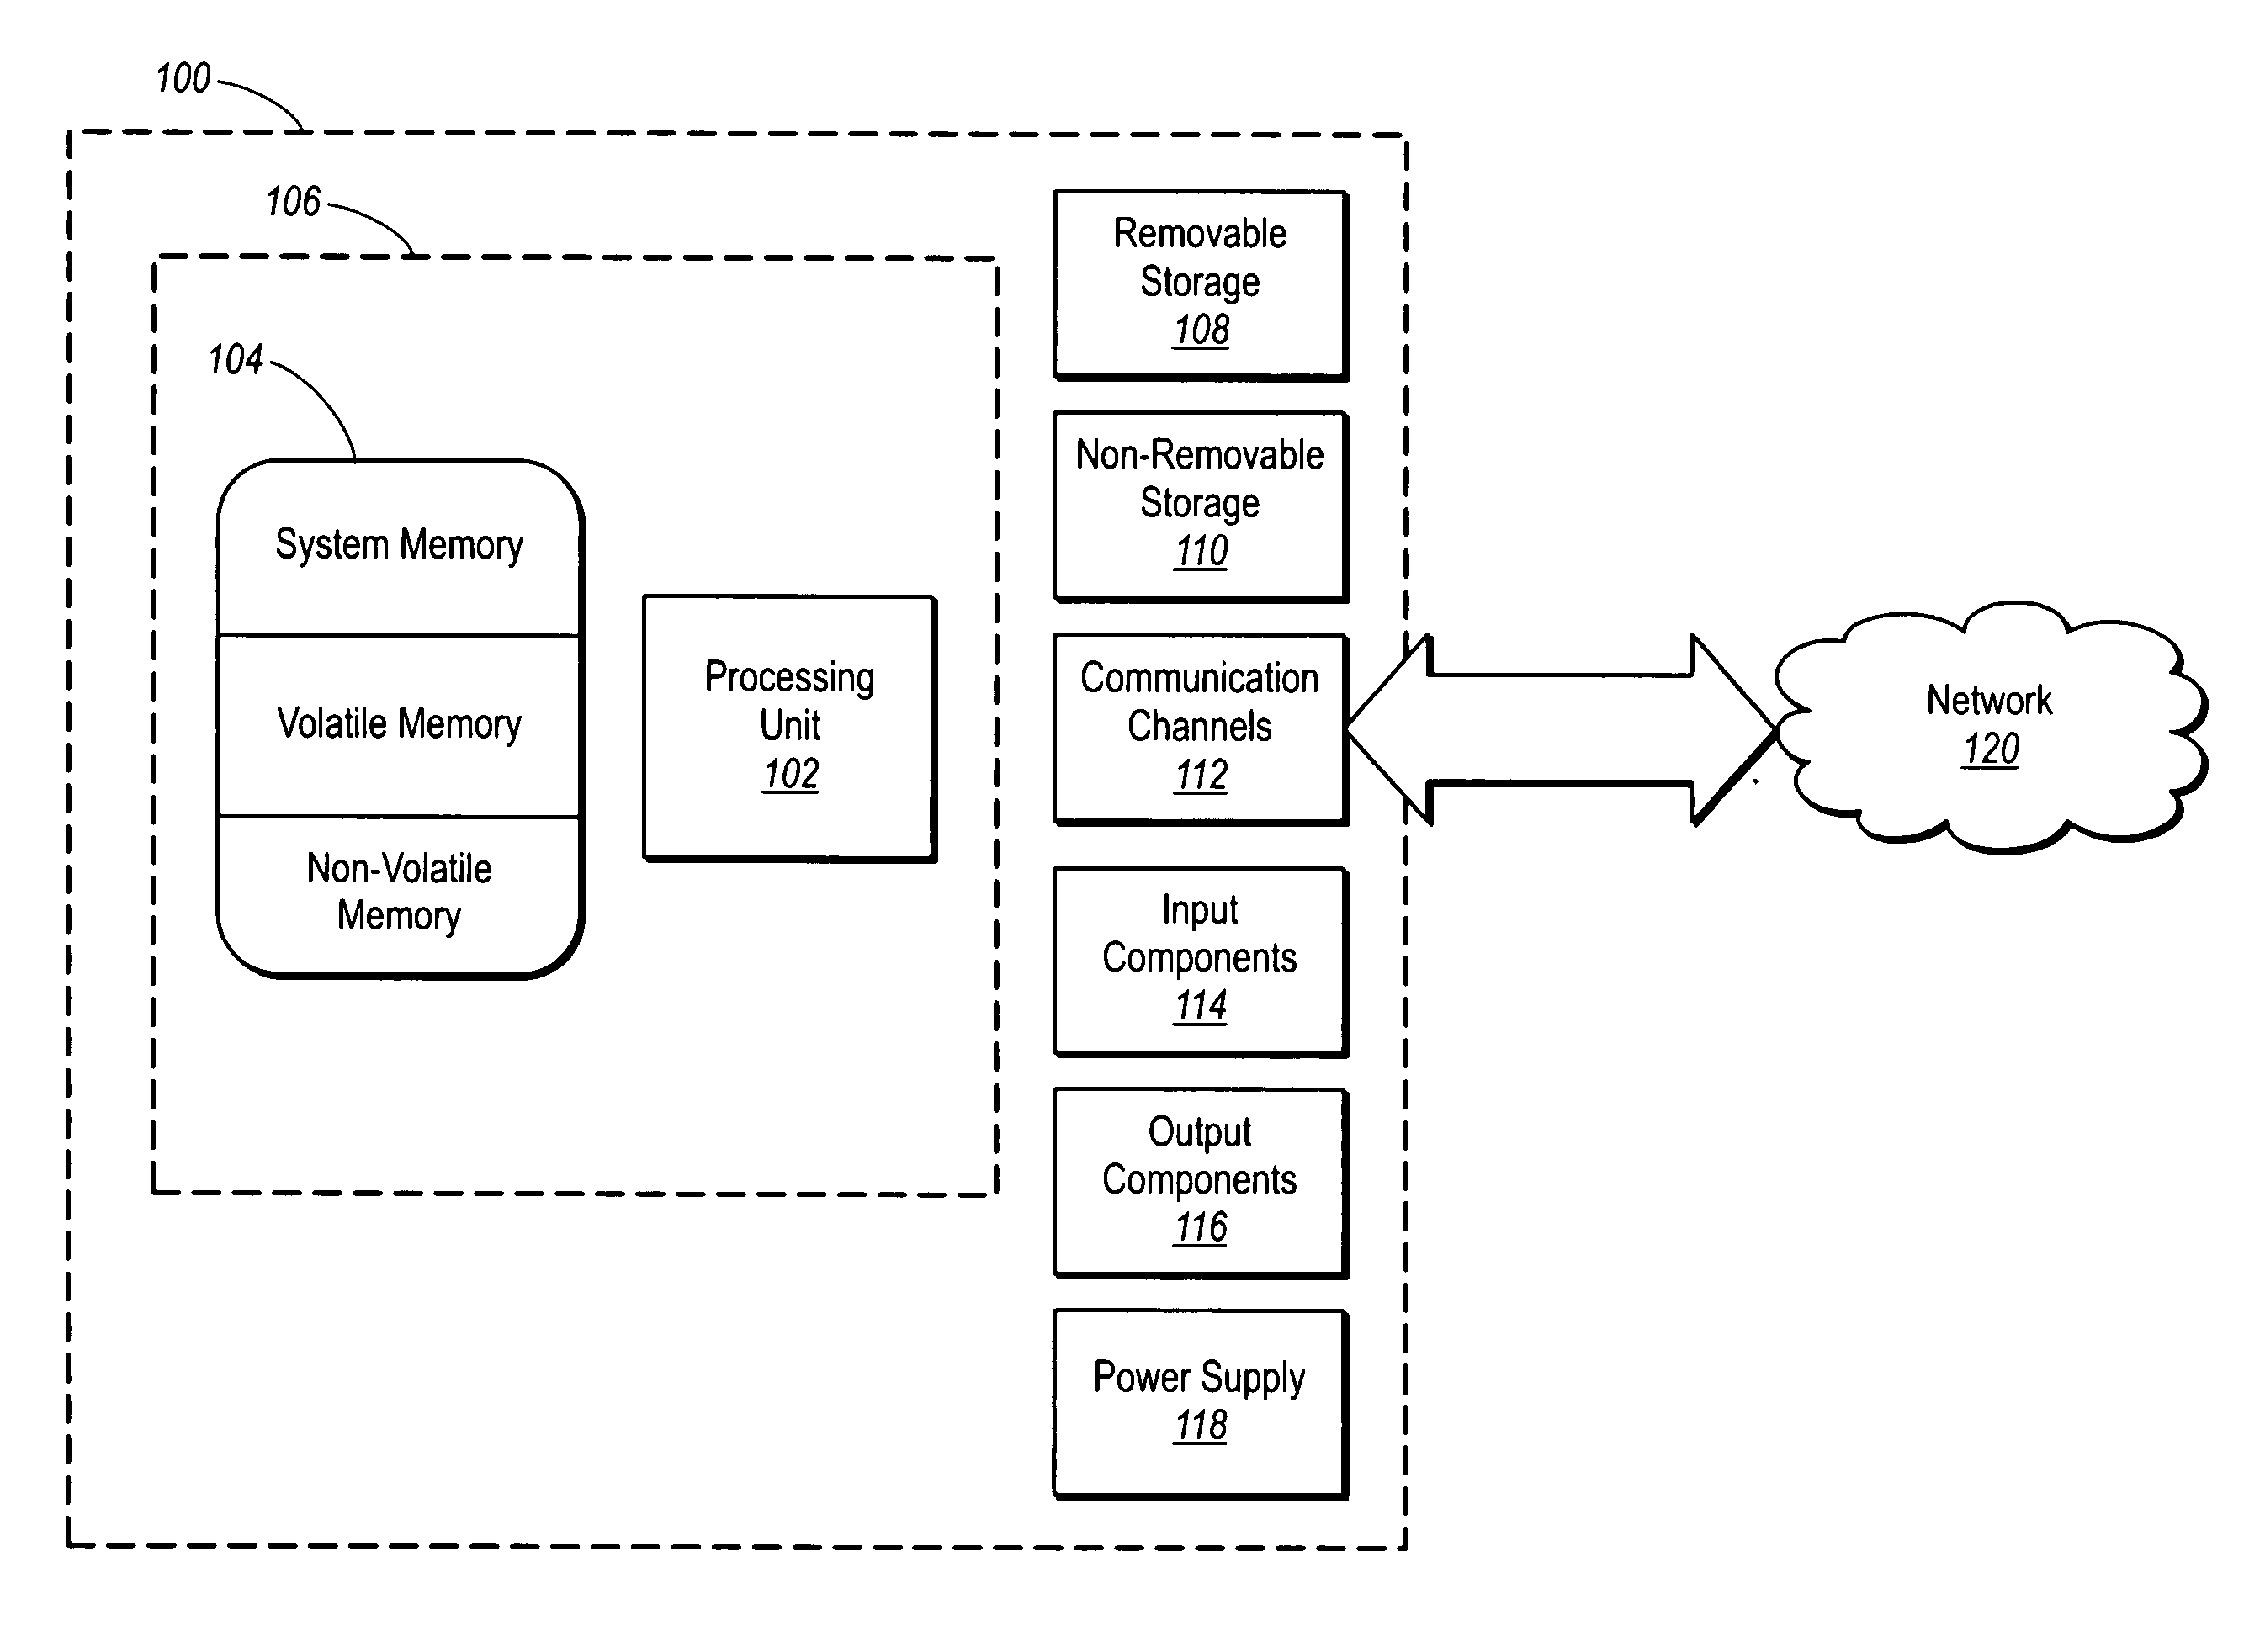 Automated generation of computer-executable compensation procedures for previously executed methods